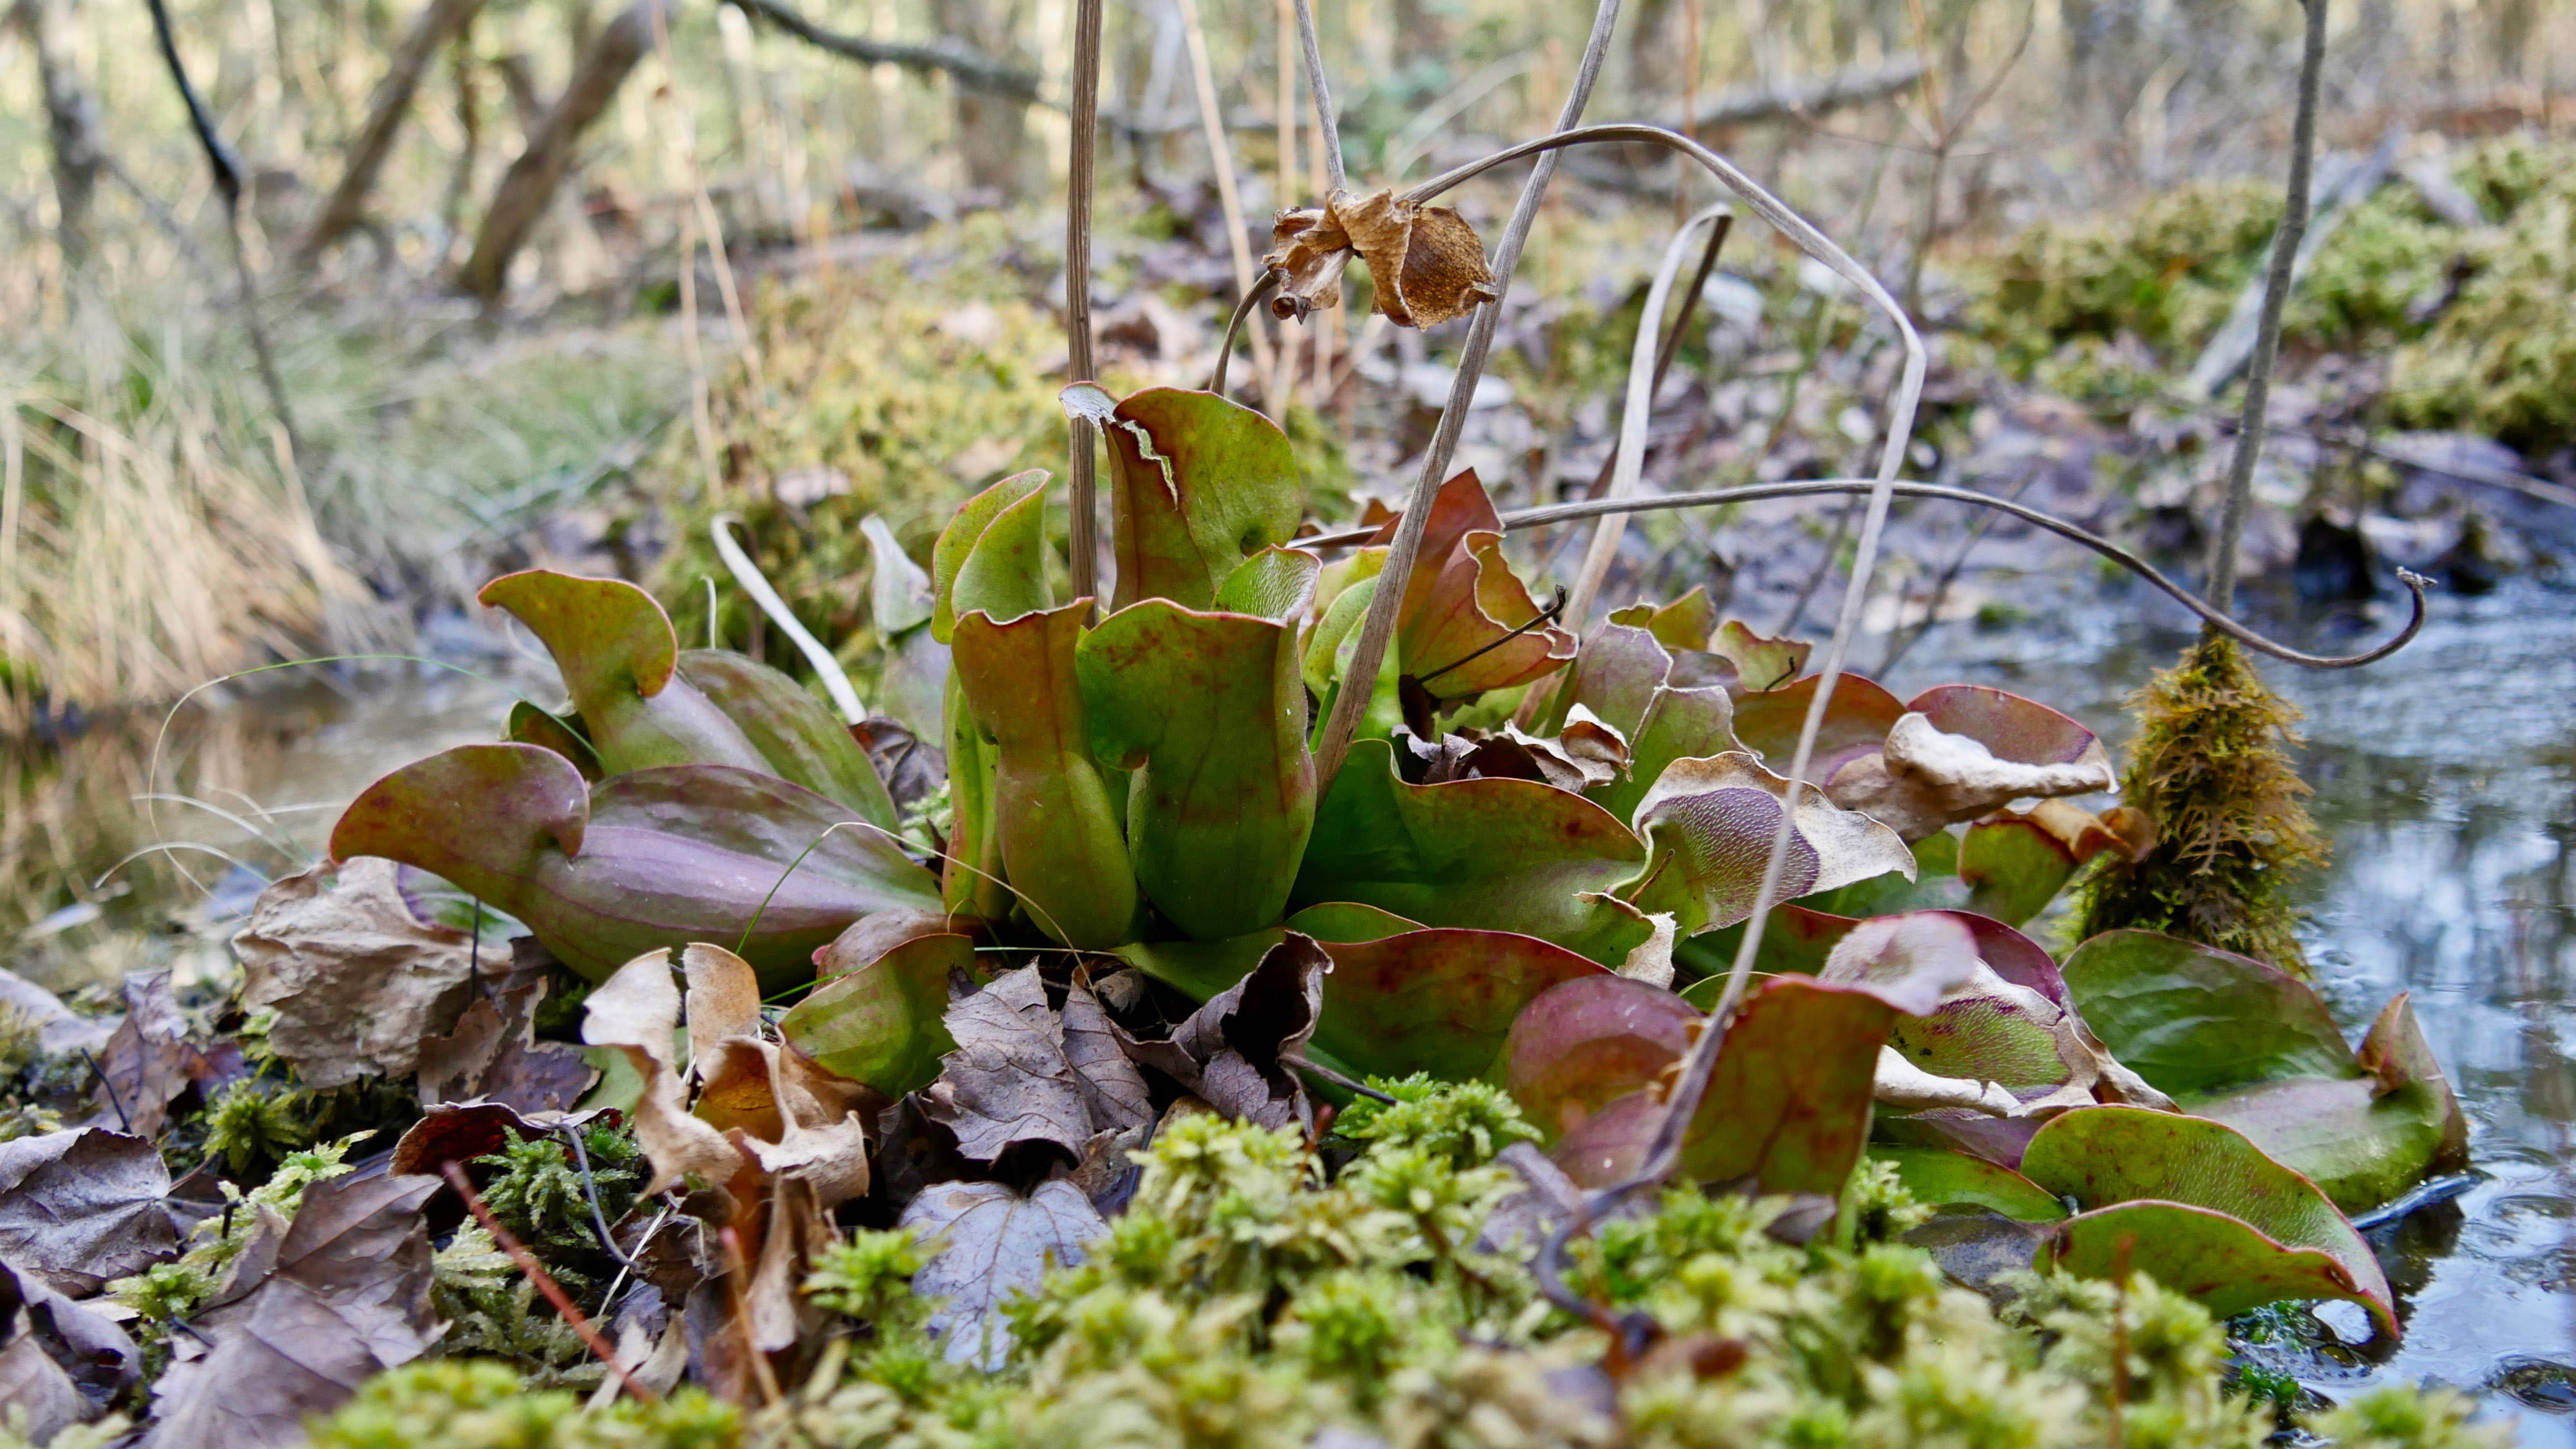 A clump of pitcher plants grow on the forest floor. The squat green tubes have a large opening to trap insects.